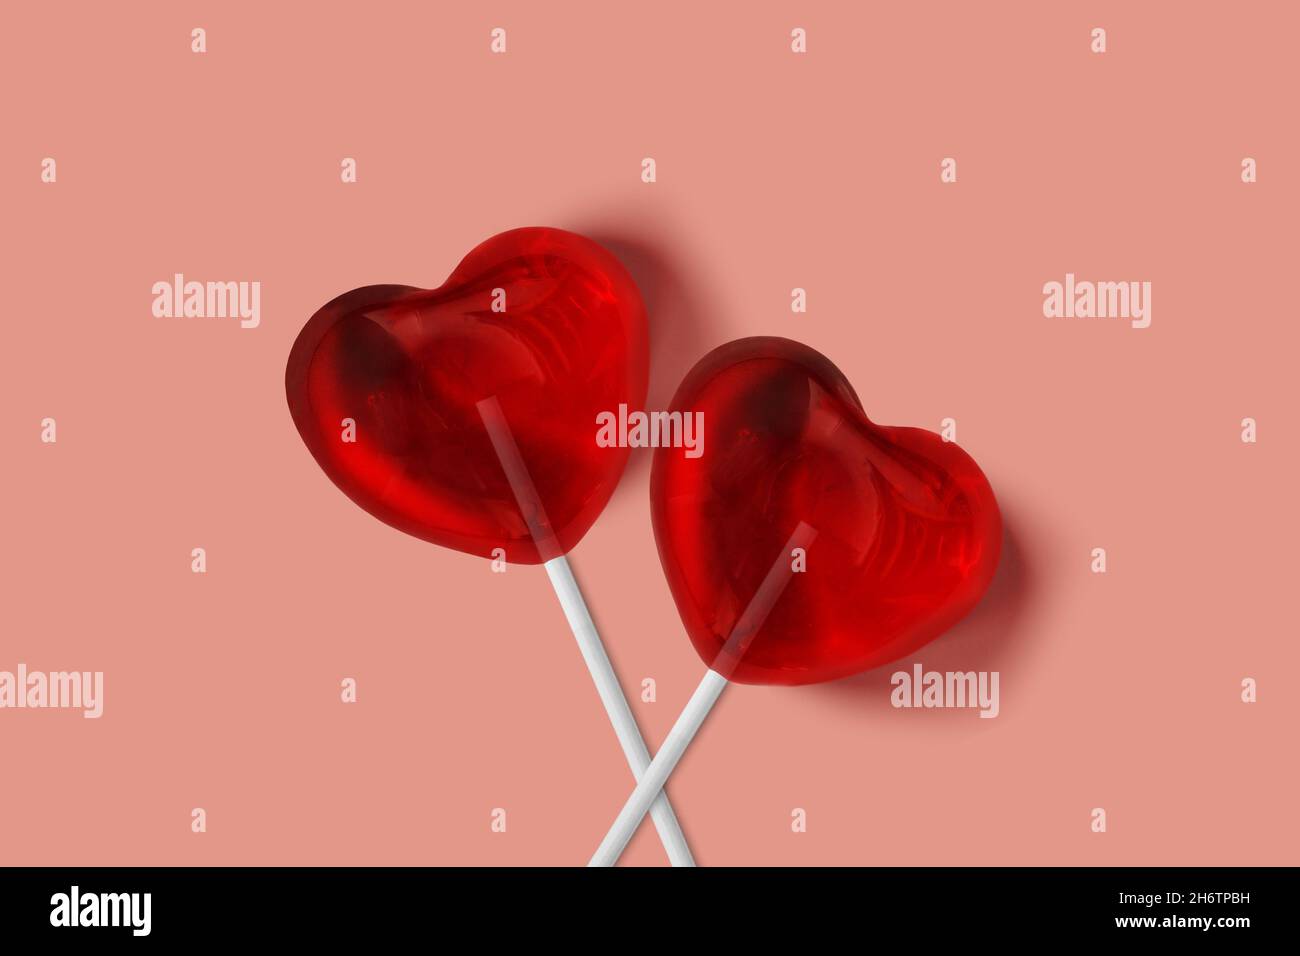 Two heart lollypops on pink background - Love and sweetness concept Stock Photo